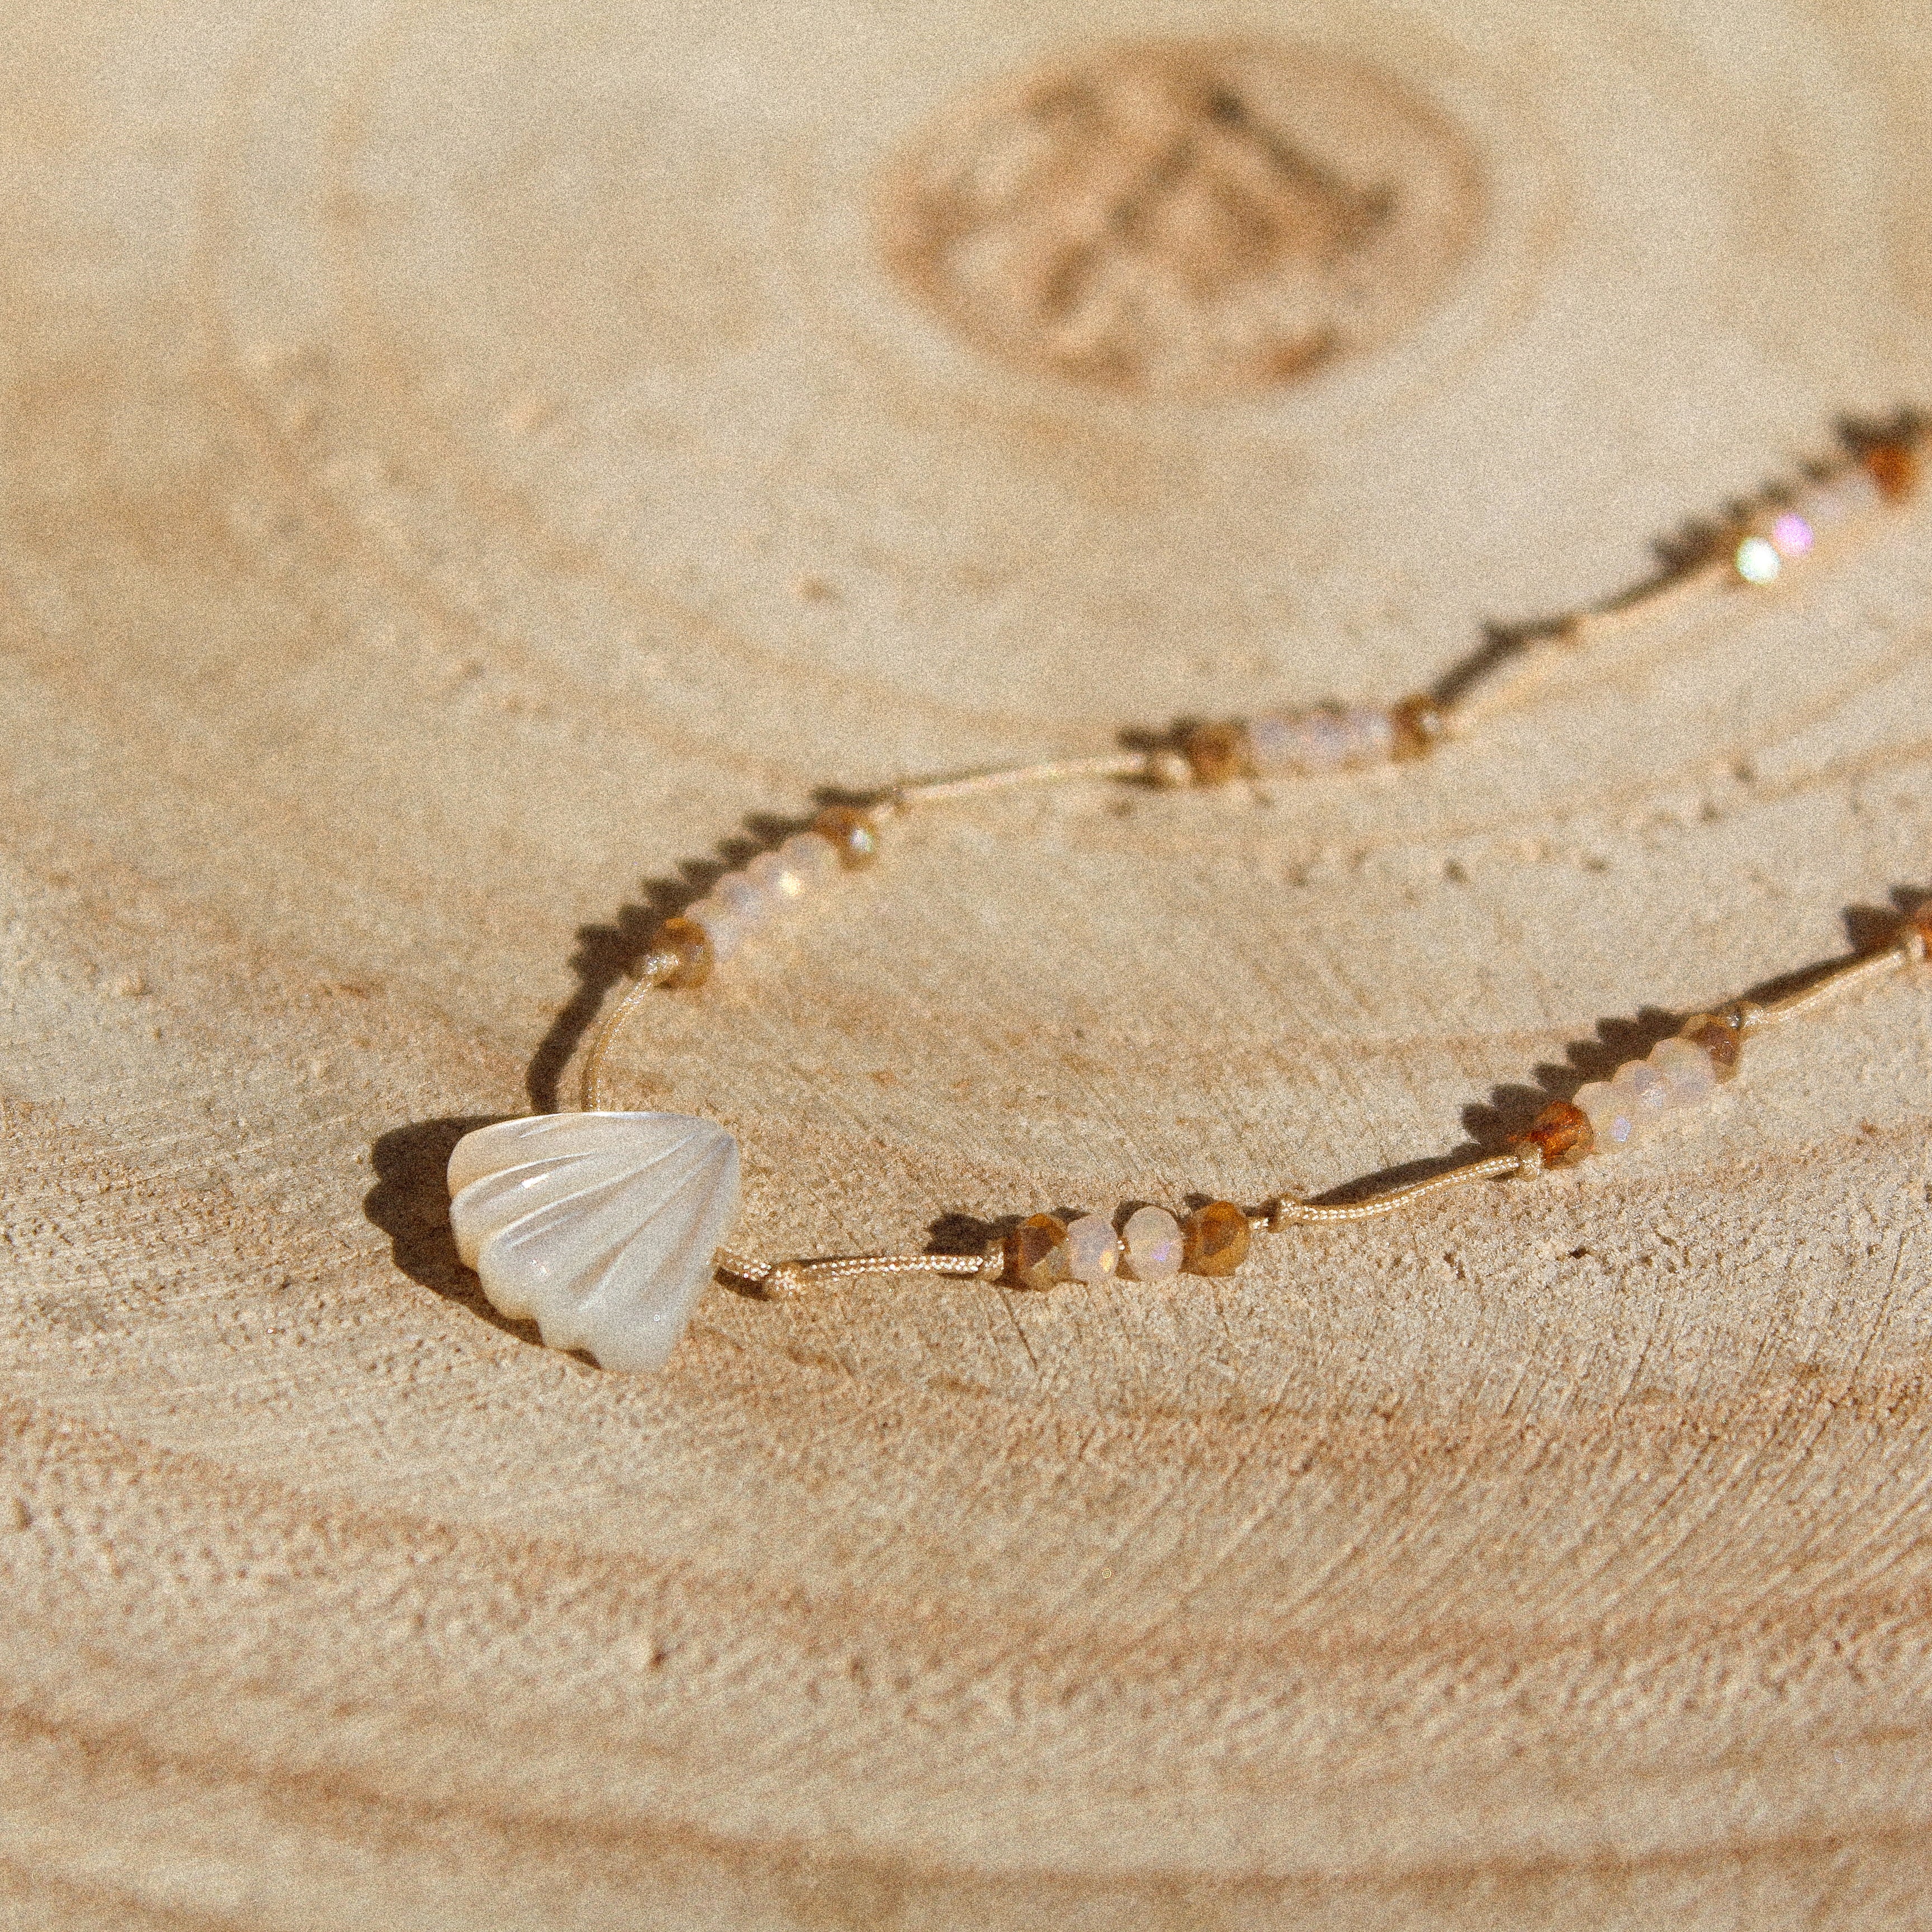 MERMAID ANKLET - MOTHER OF PEARL SHELL & BEADS